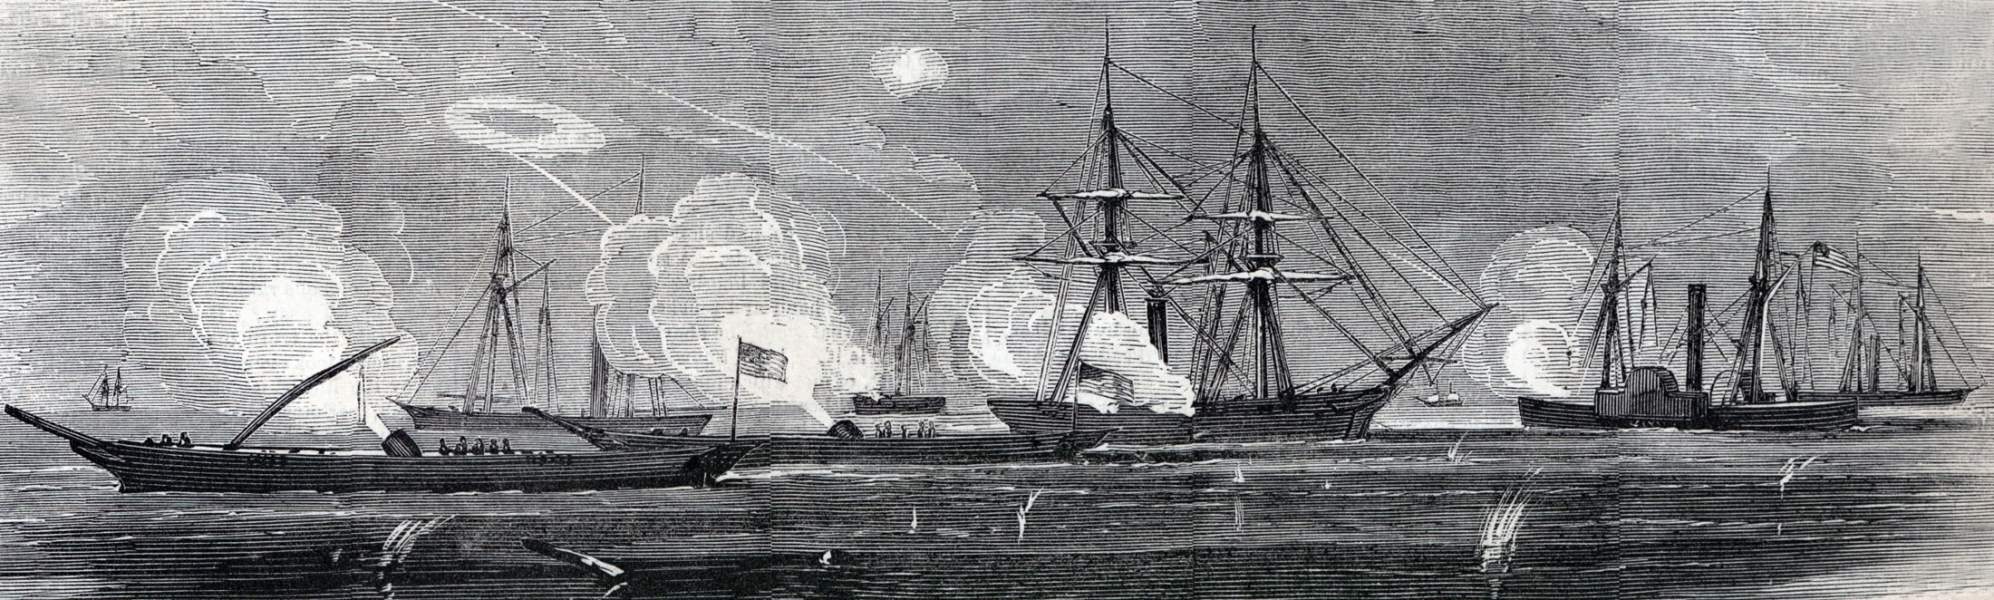 Union naval units bombarding the Confederate forts in Charleston Harbor, August 17, 1865, artist's impression, zoomable image